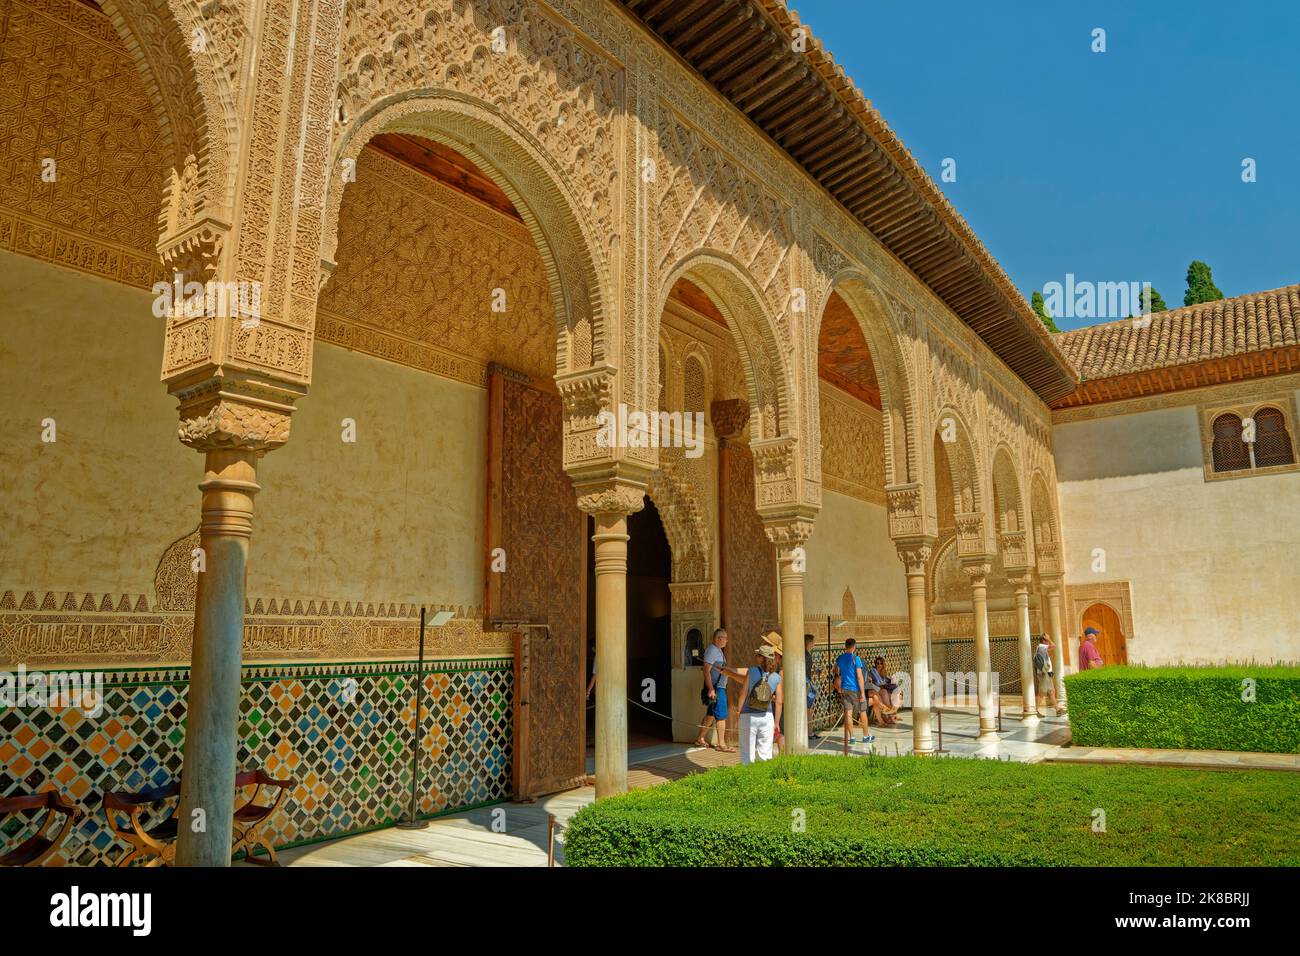 The Court of the Myrtles, a part of the Nasrid Comares Palace, part of the Alhambra Palace complex at Granada, Andalusia, Spain. Stock Photo